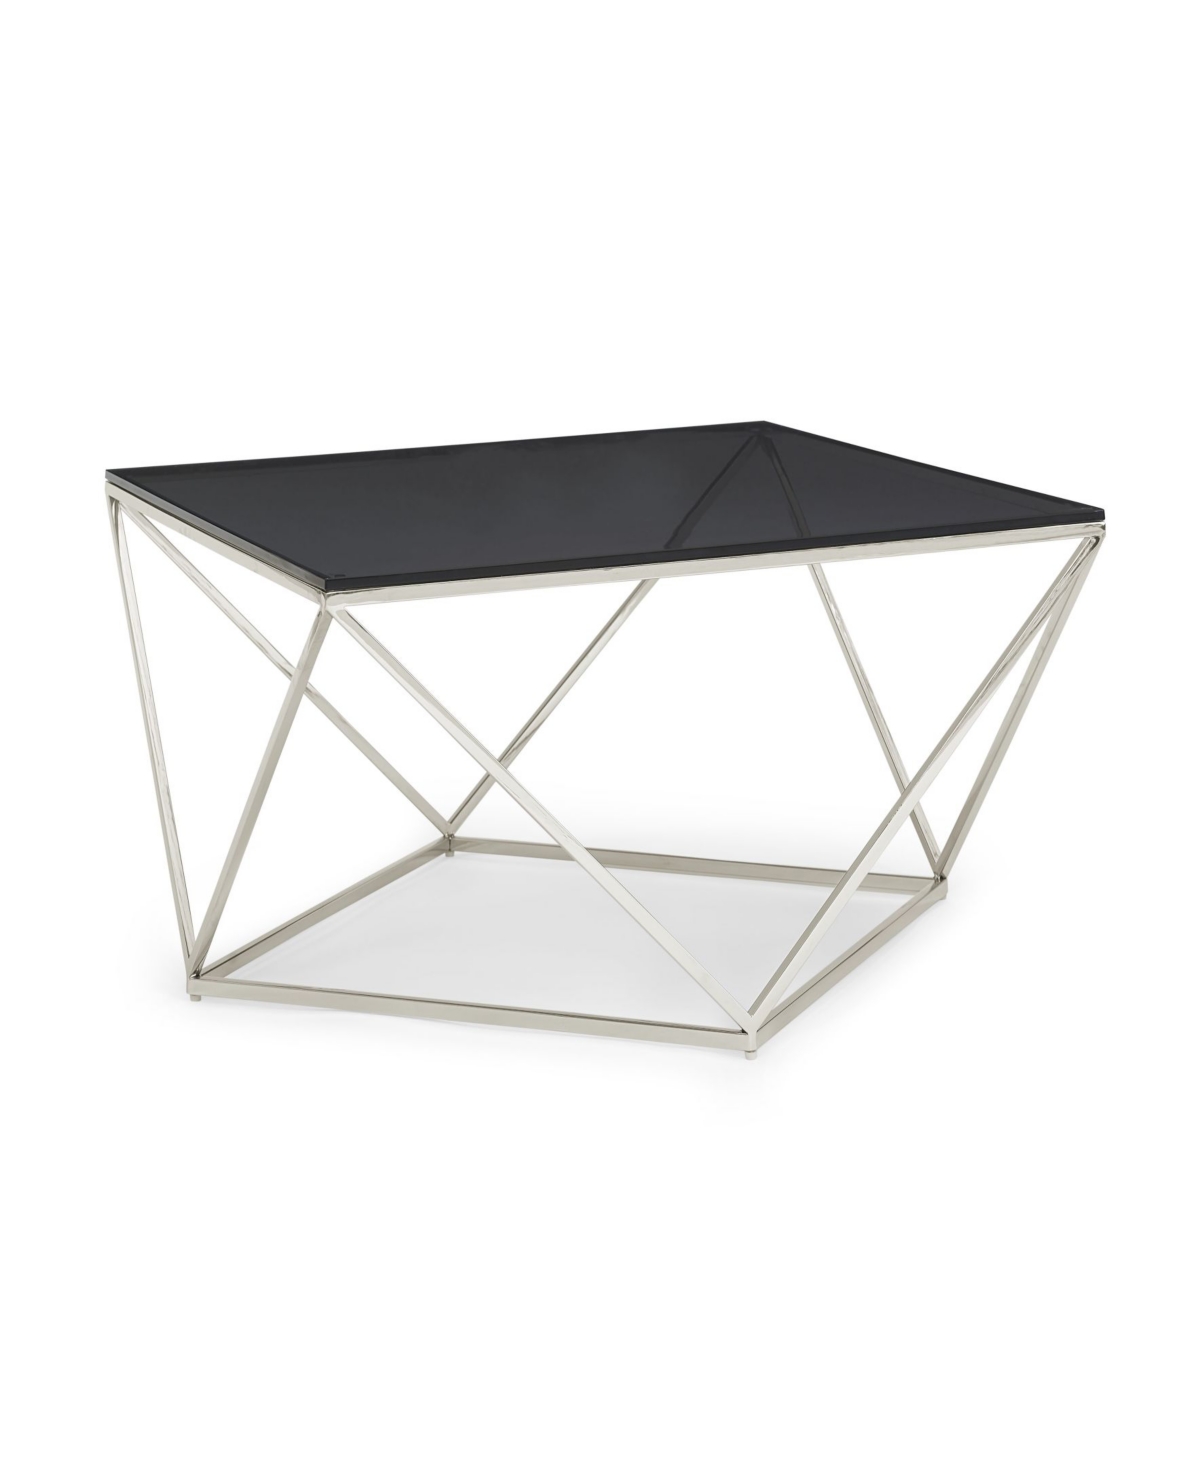 Macy's Aria 41" Smoked Glass And Polished Stainless Steel Coffee Table In Pol Stainless Steel,smoked Glass